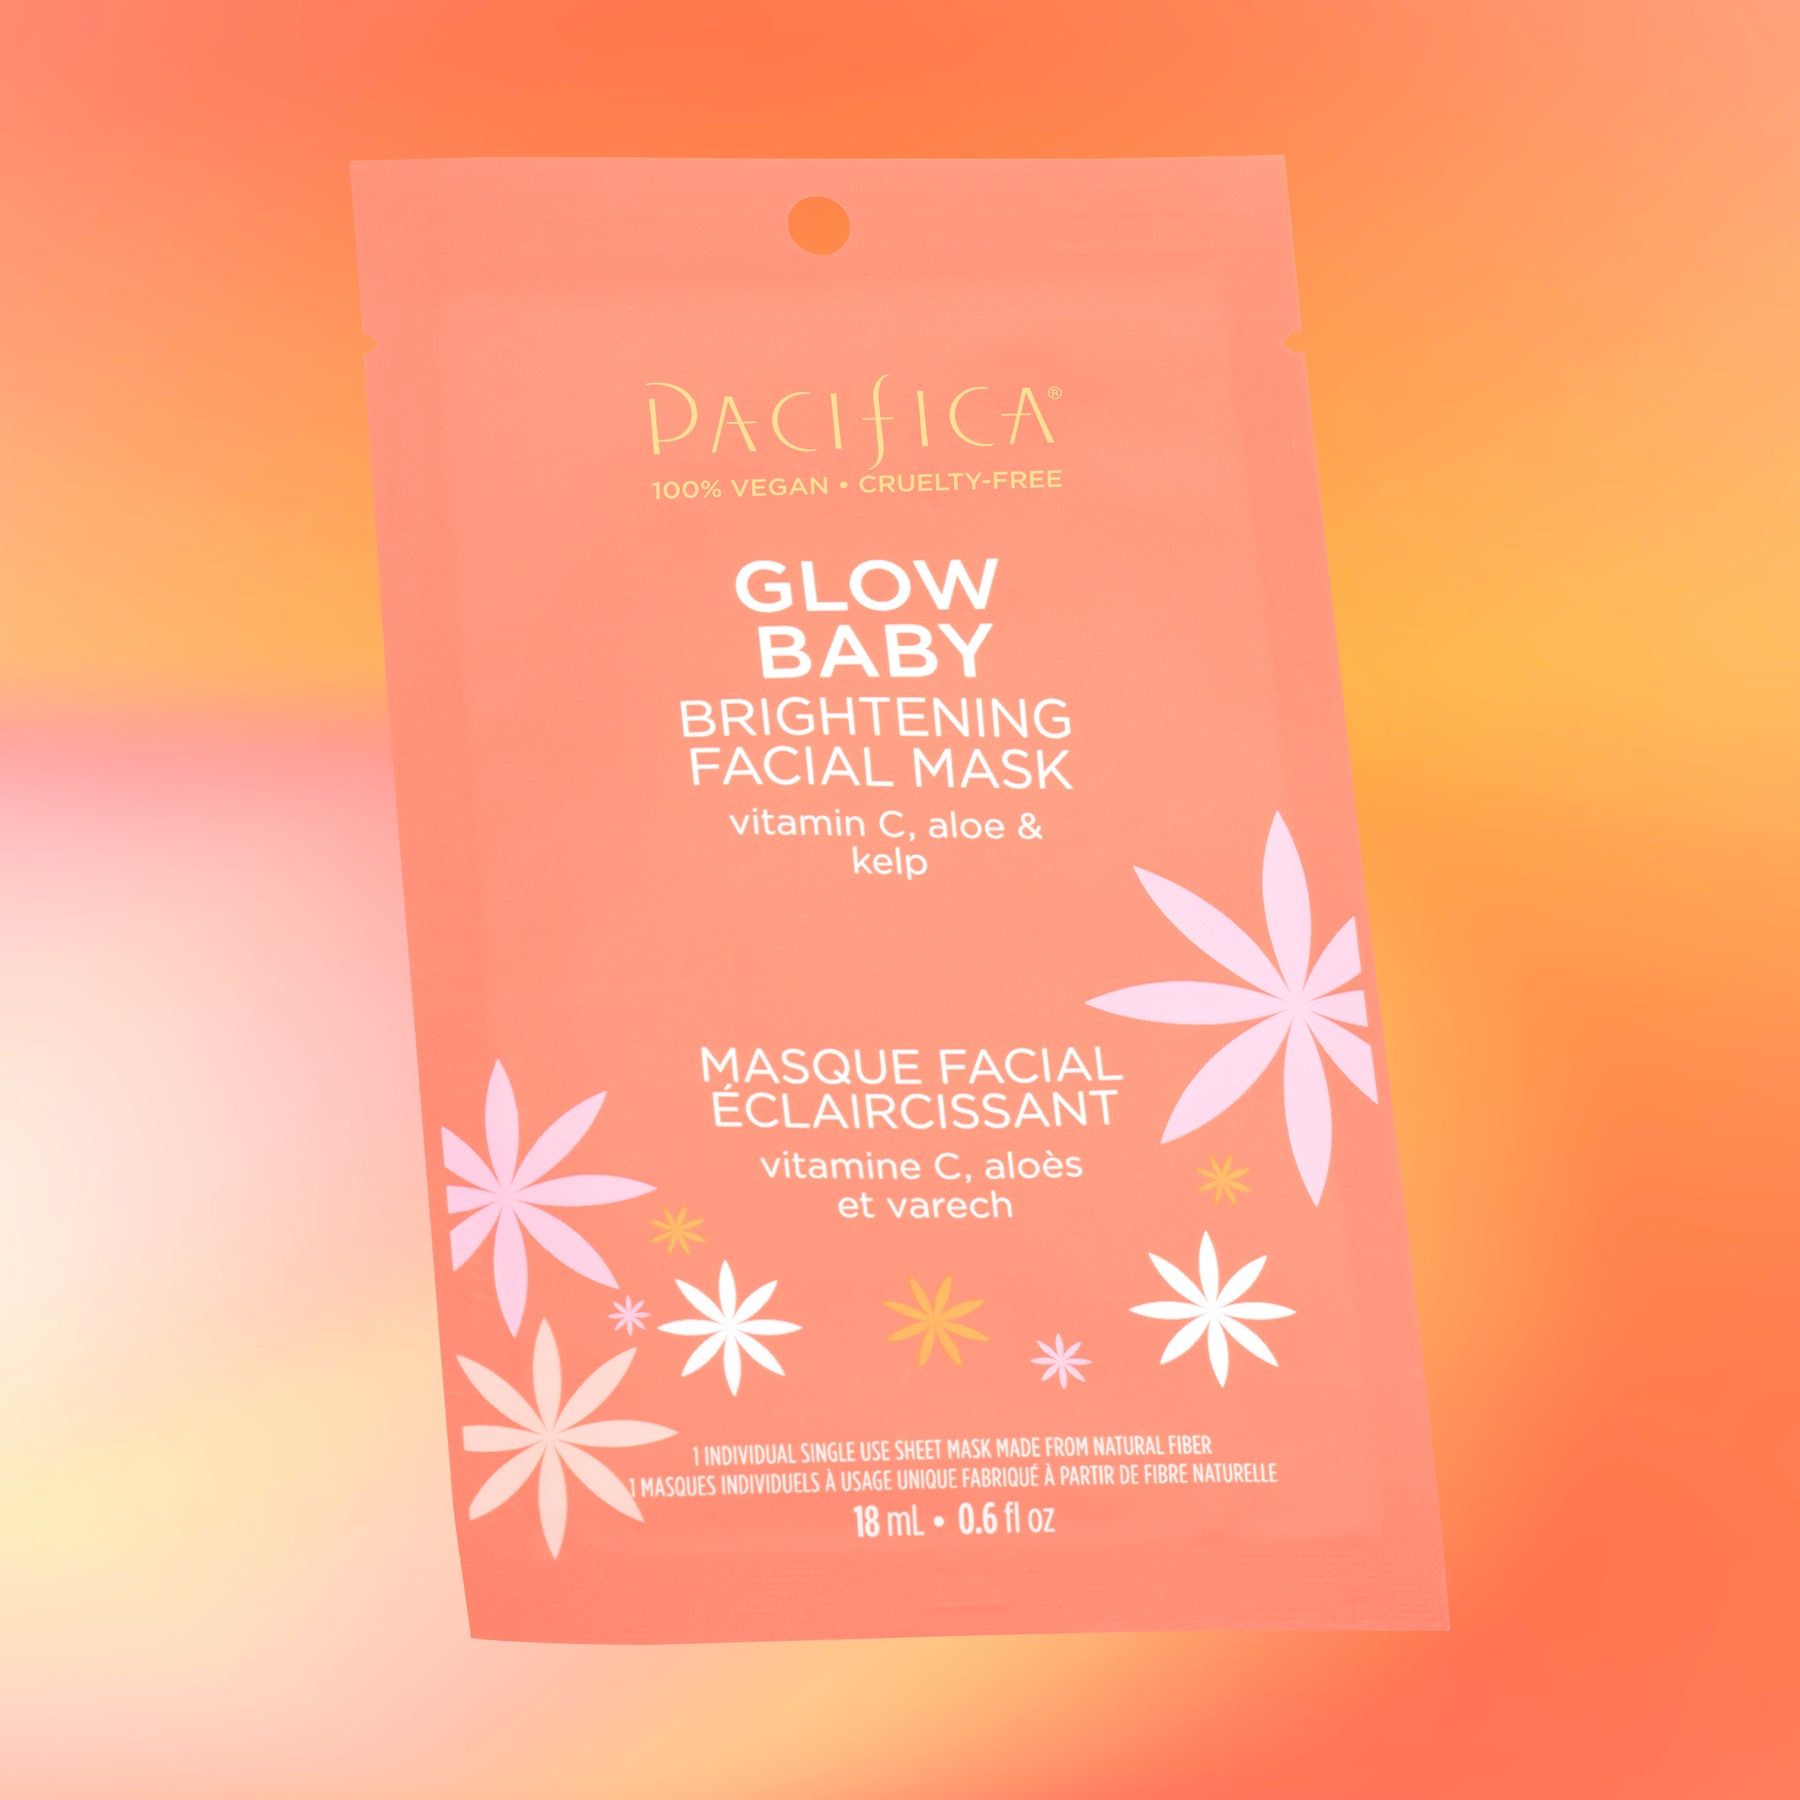 Glow Baby Brightening Facial Mask - Skin Care - Pacifica Beauty